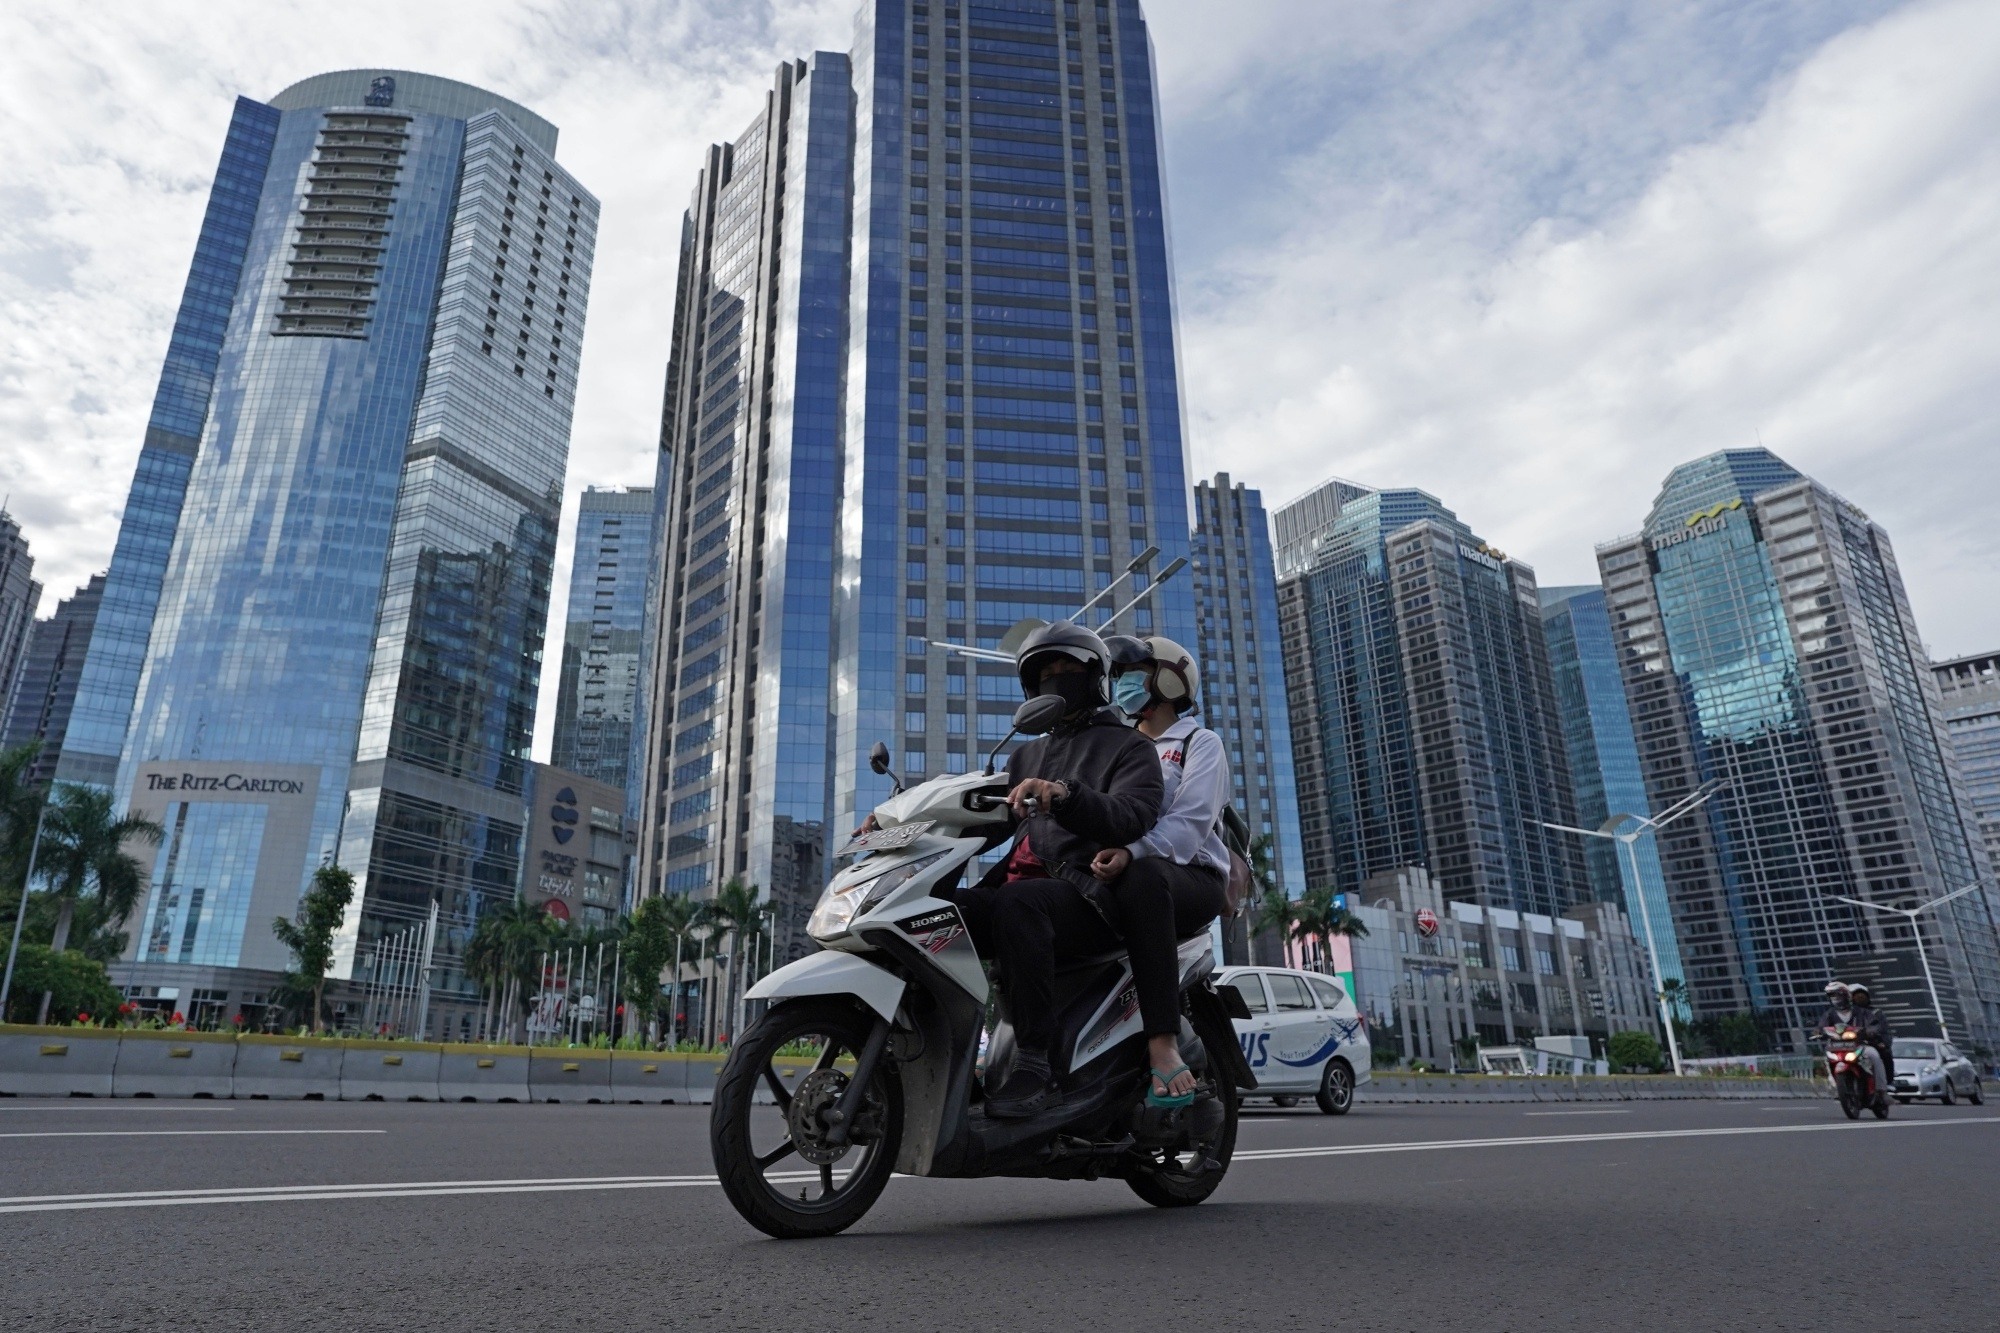 2 Million Jobless Motorbike Drivers Show Covid's Toll on Indonesia's Gig Economy